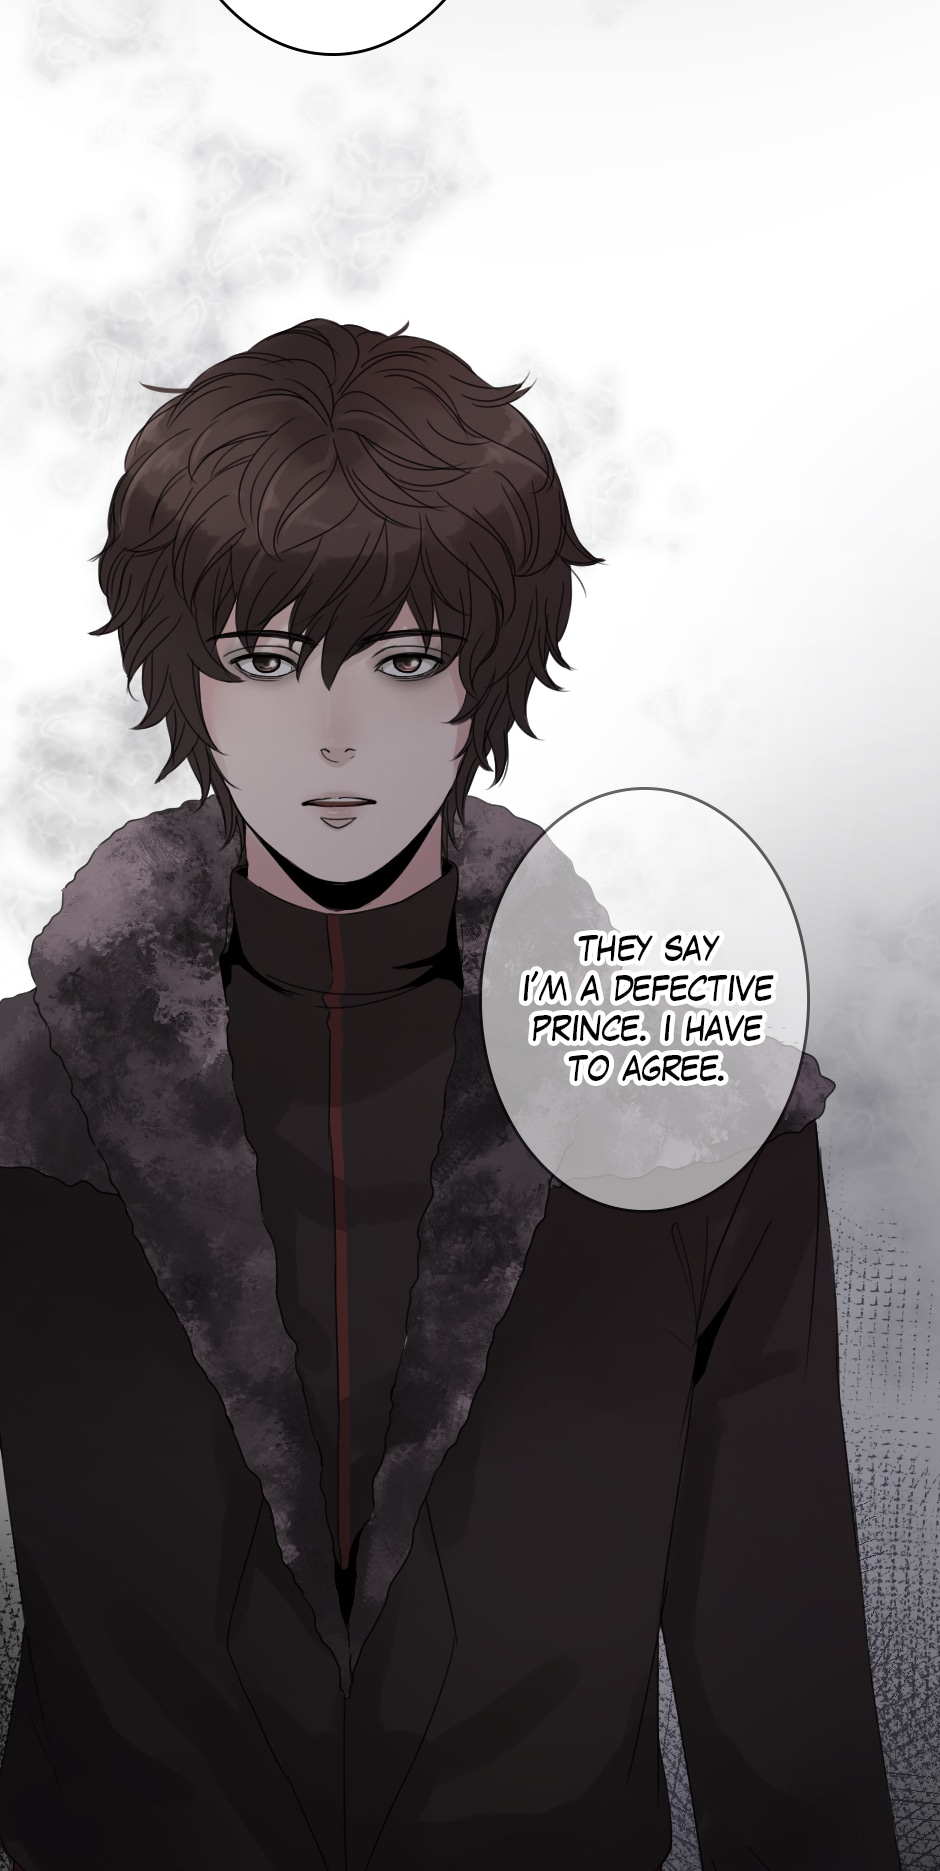 Prince of Silk and Thorn Ch.10